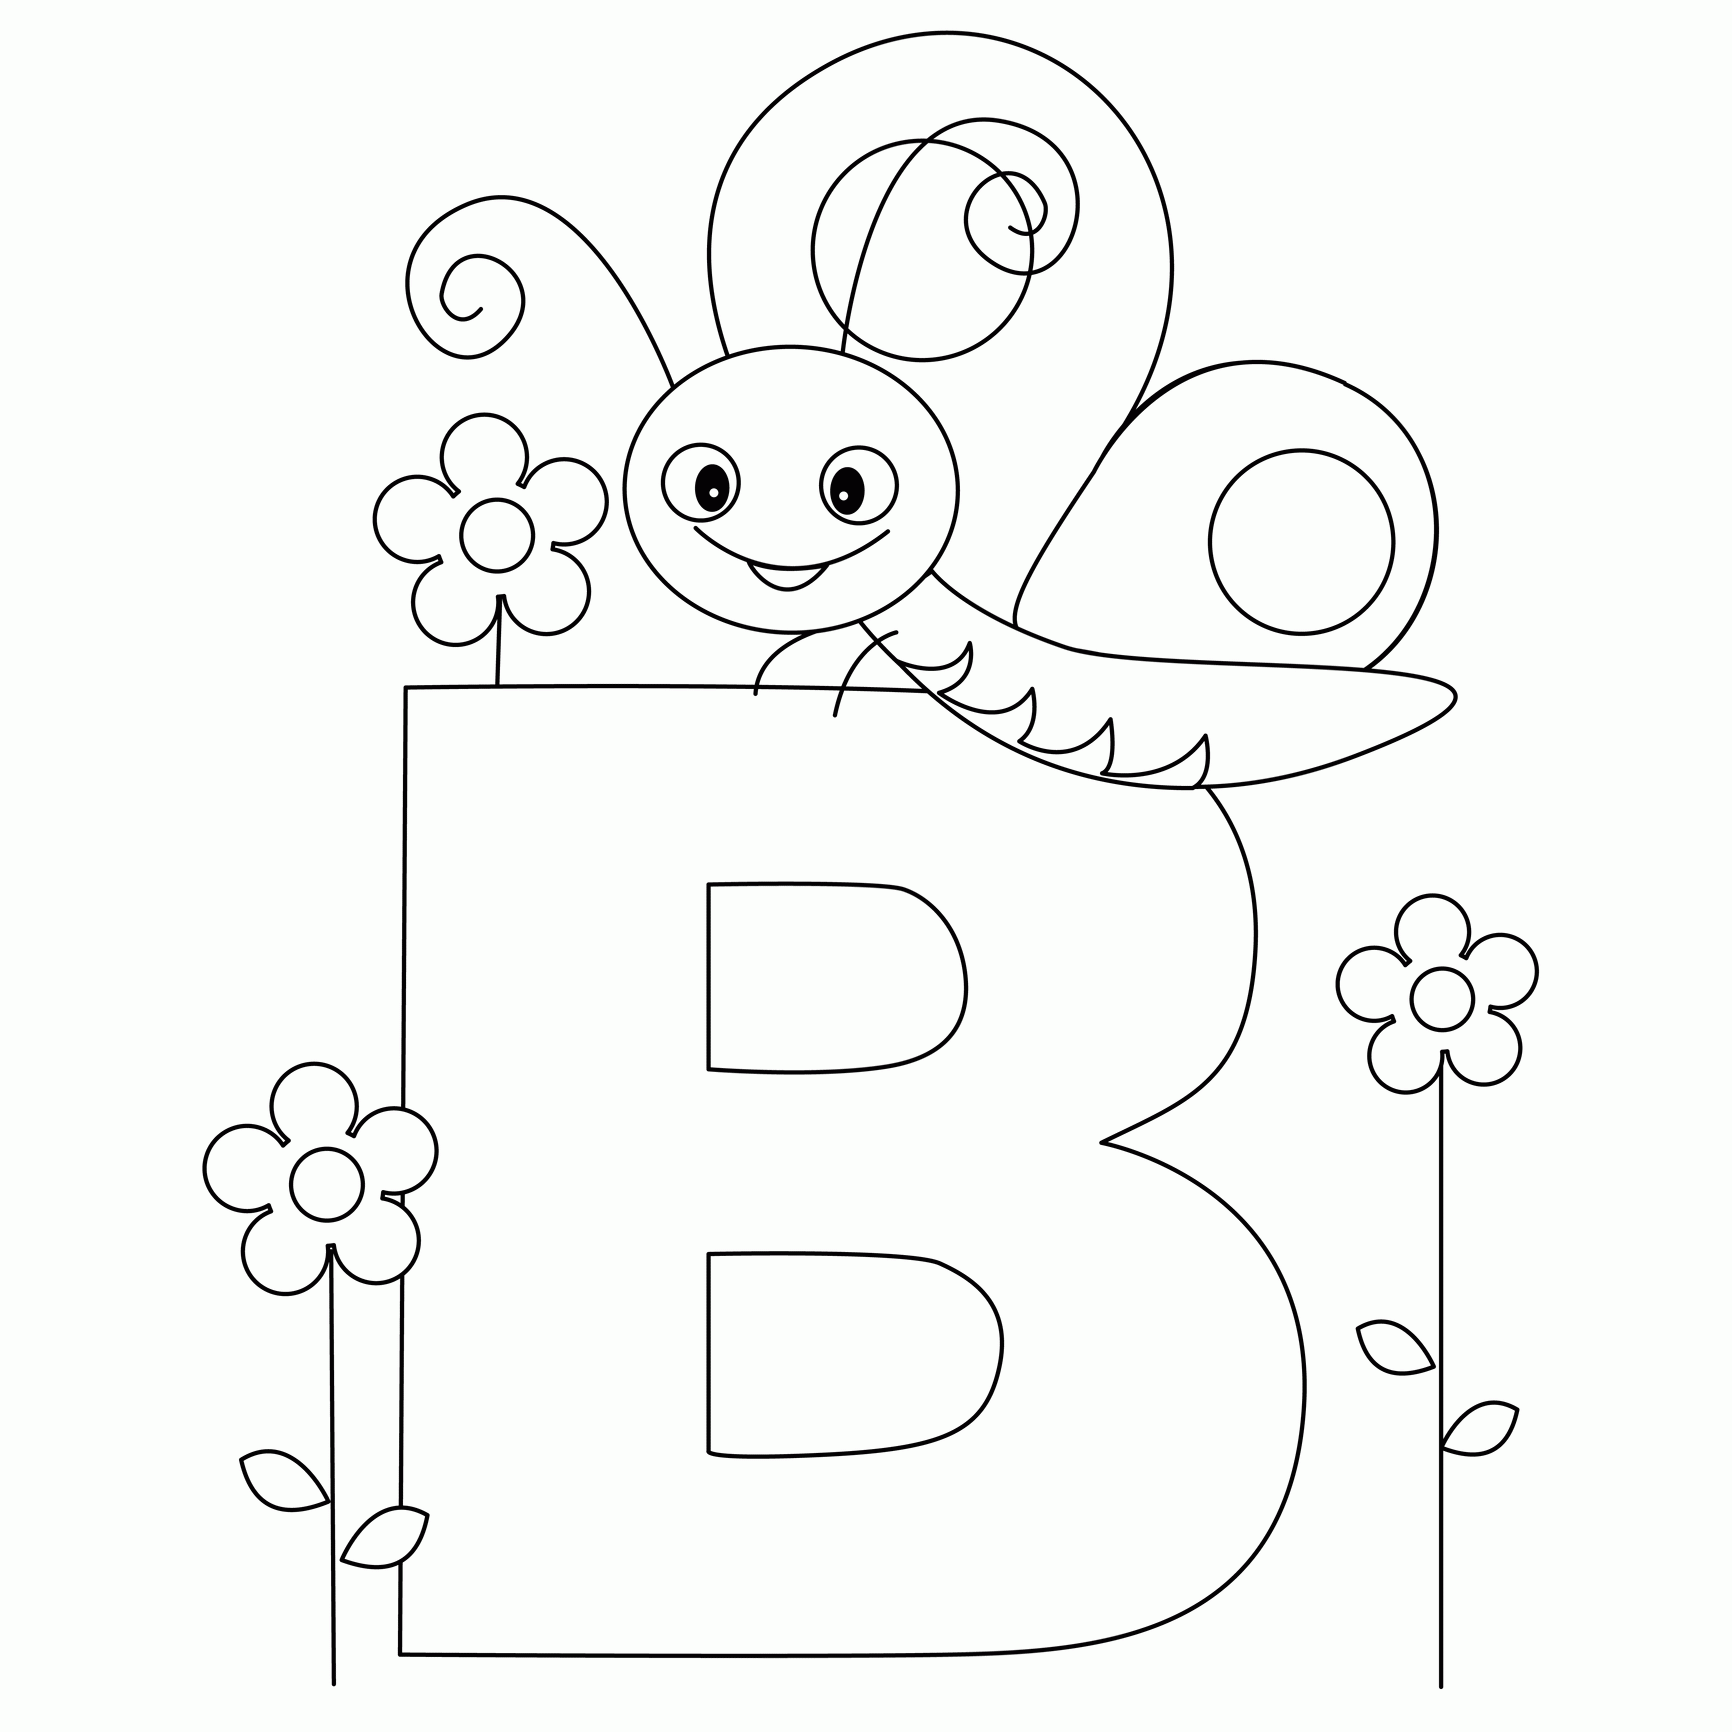 Letters Coloring Page   Coloring Home